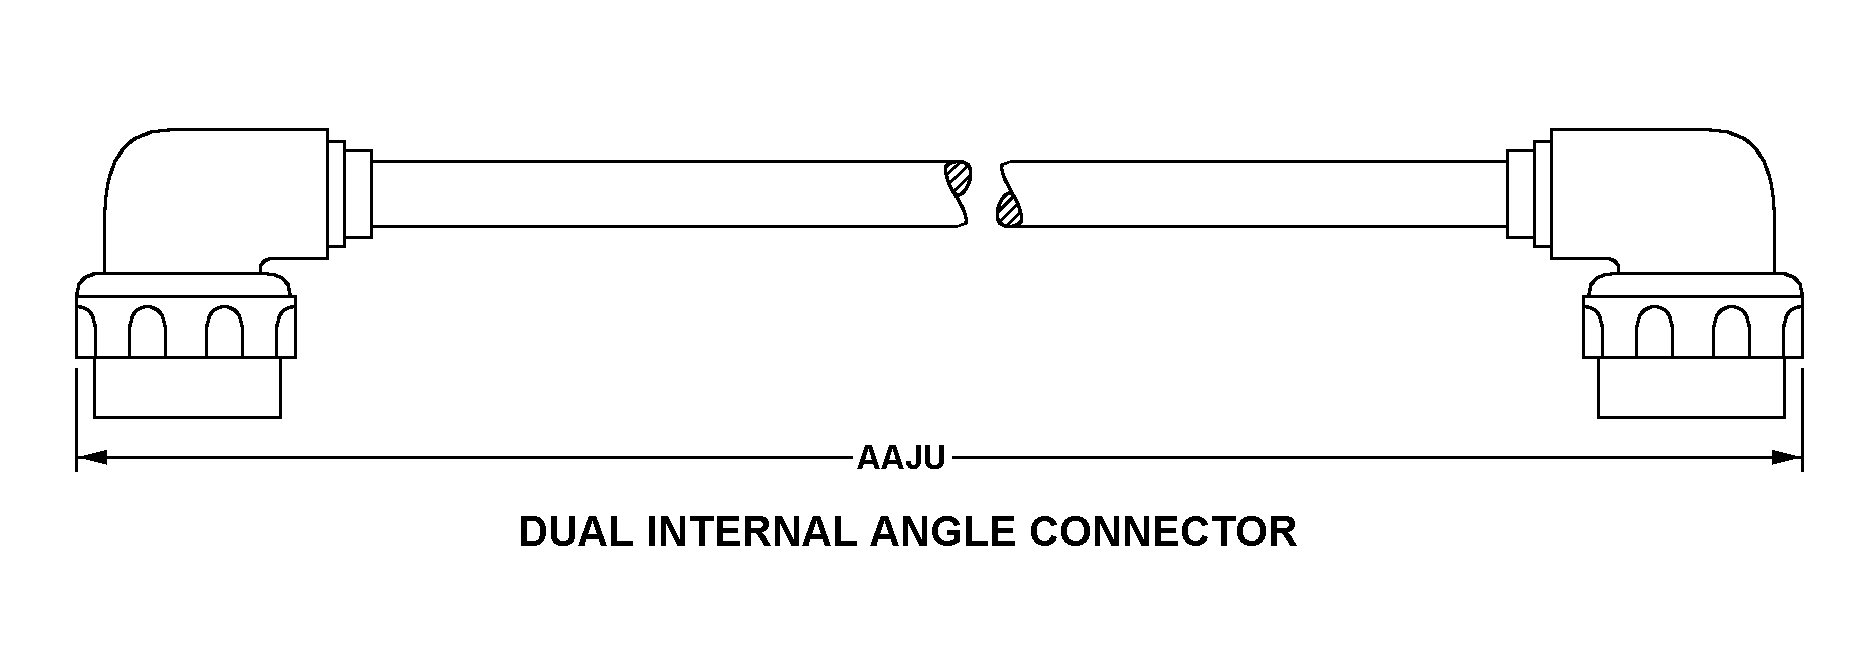 DUAL INTERNAL ANGLE CONNECTOR style nsn 5995-01-053-0606